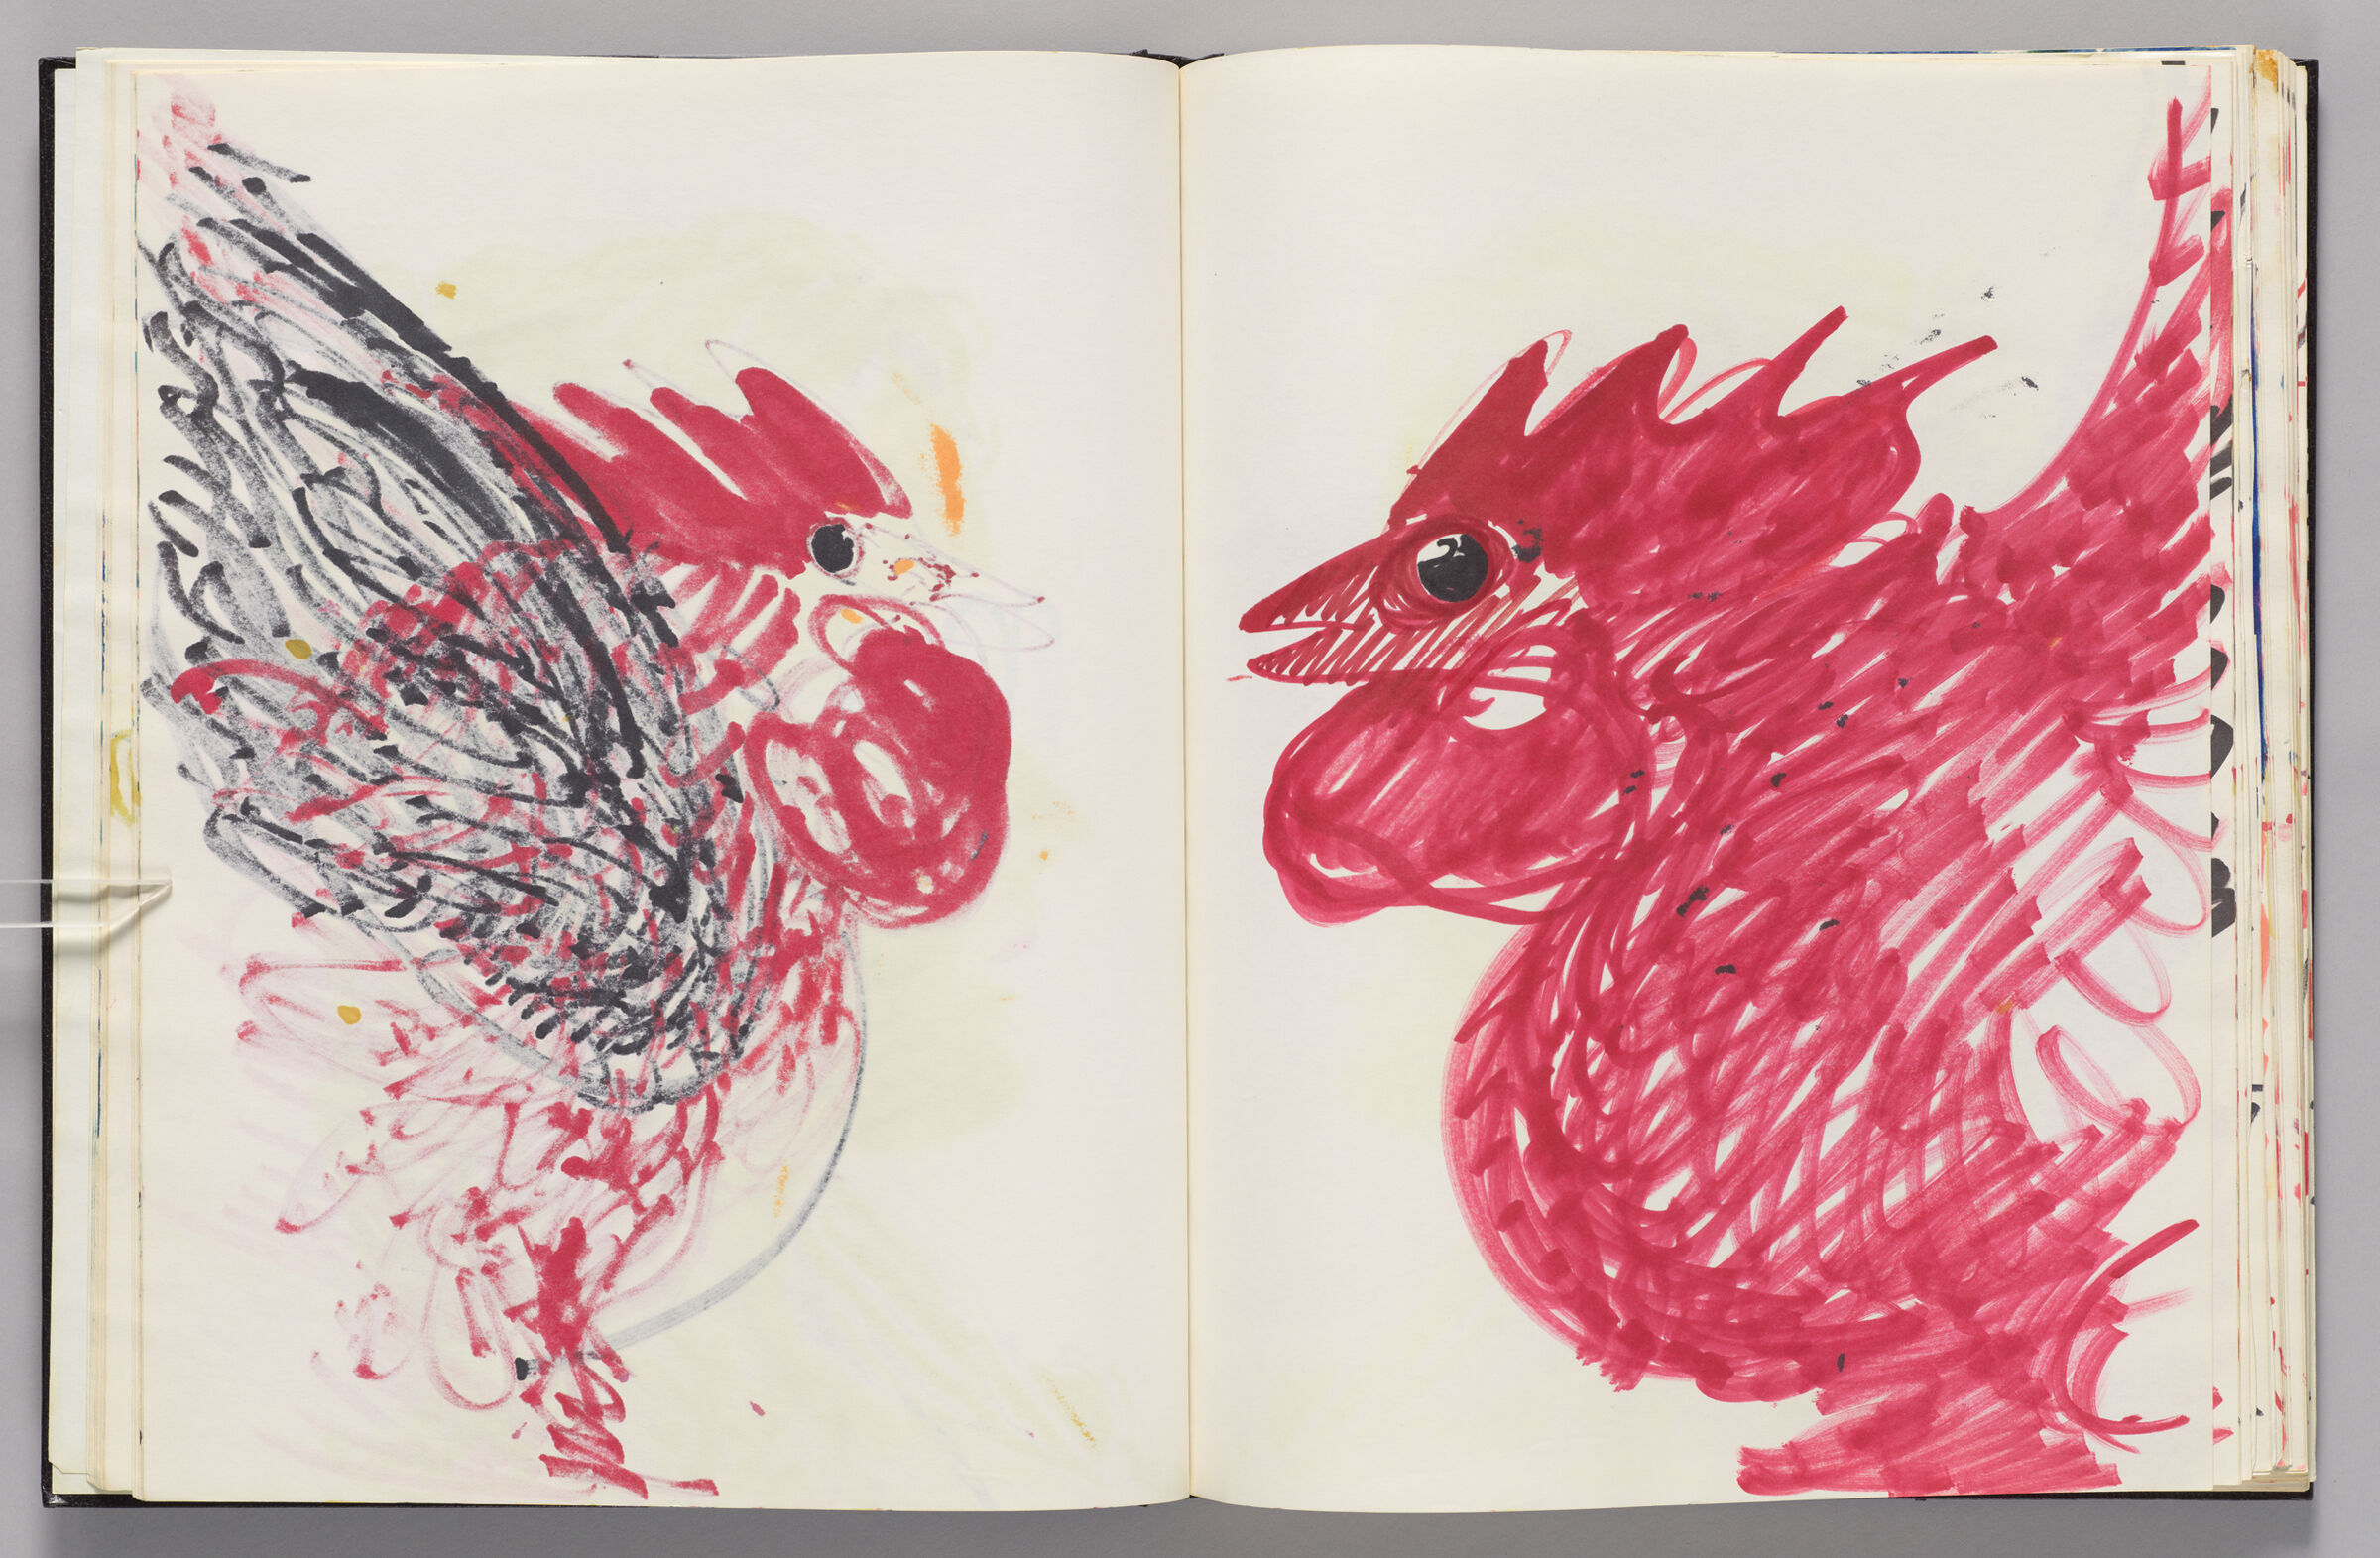 Untitled (Bleed-Through Of Previous Page, Left Page); Untitled (Rooster In Red With Eye In Black, Right Page)